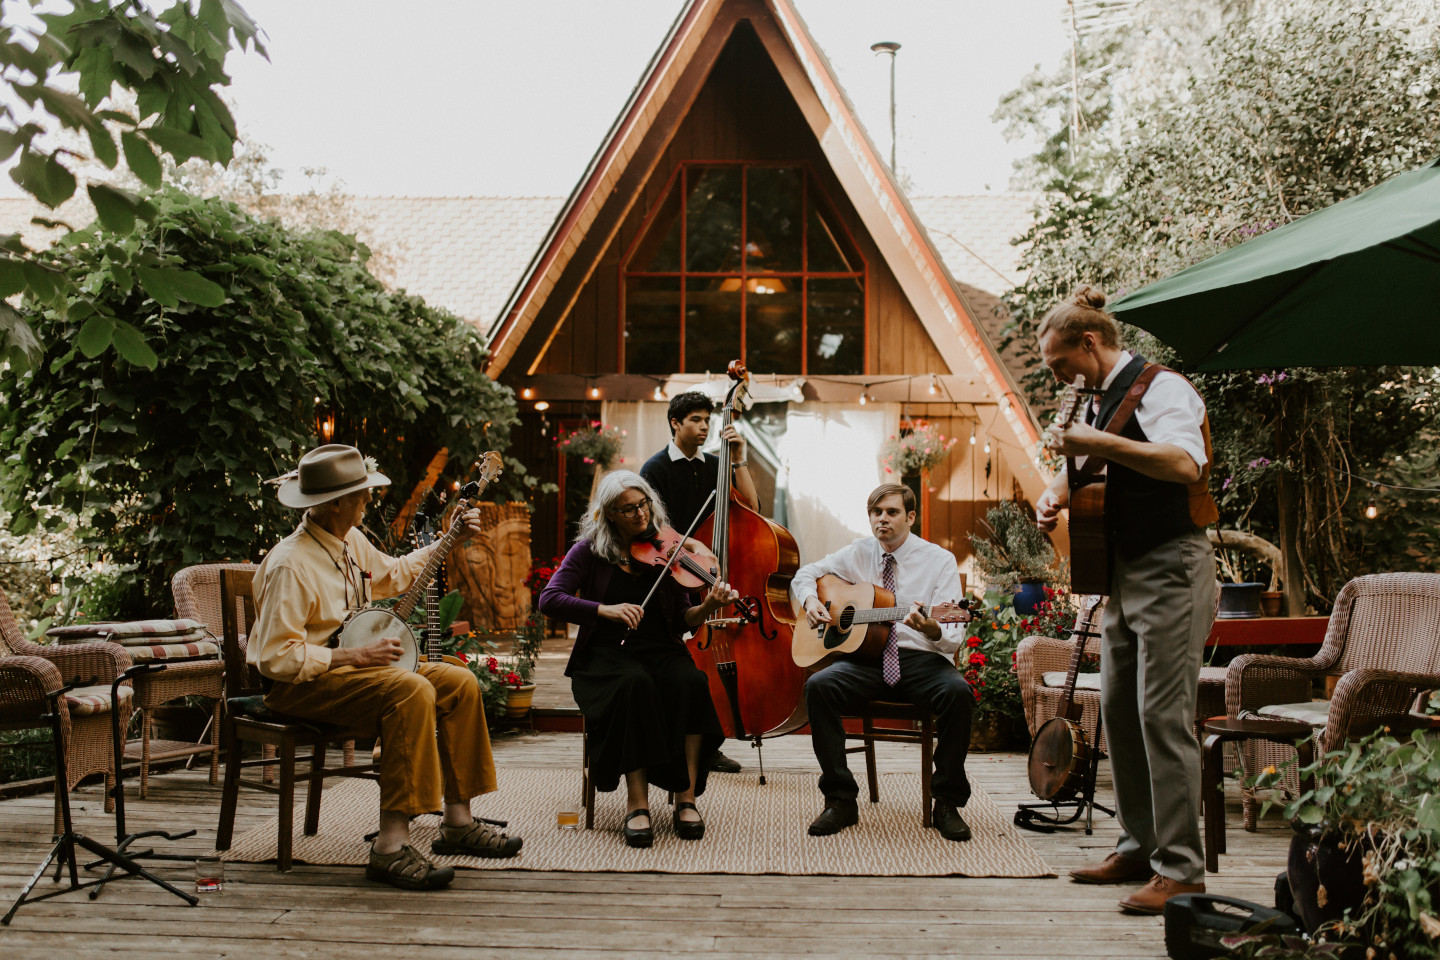 A band plays for guests in Corvallis, Oregon. Intimate wedding photography in Corvallis Oregon by Sienna Plus Josh.